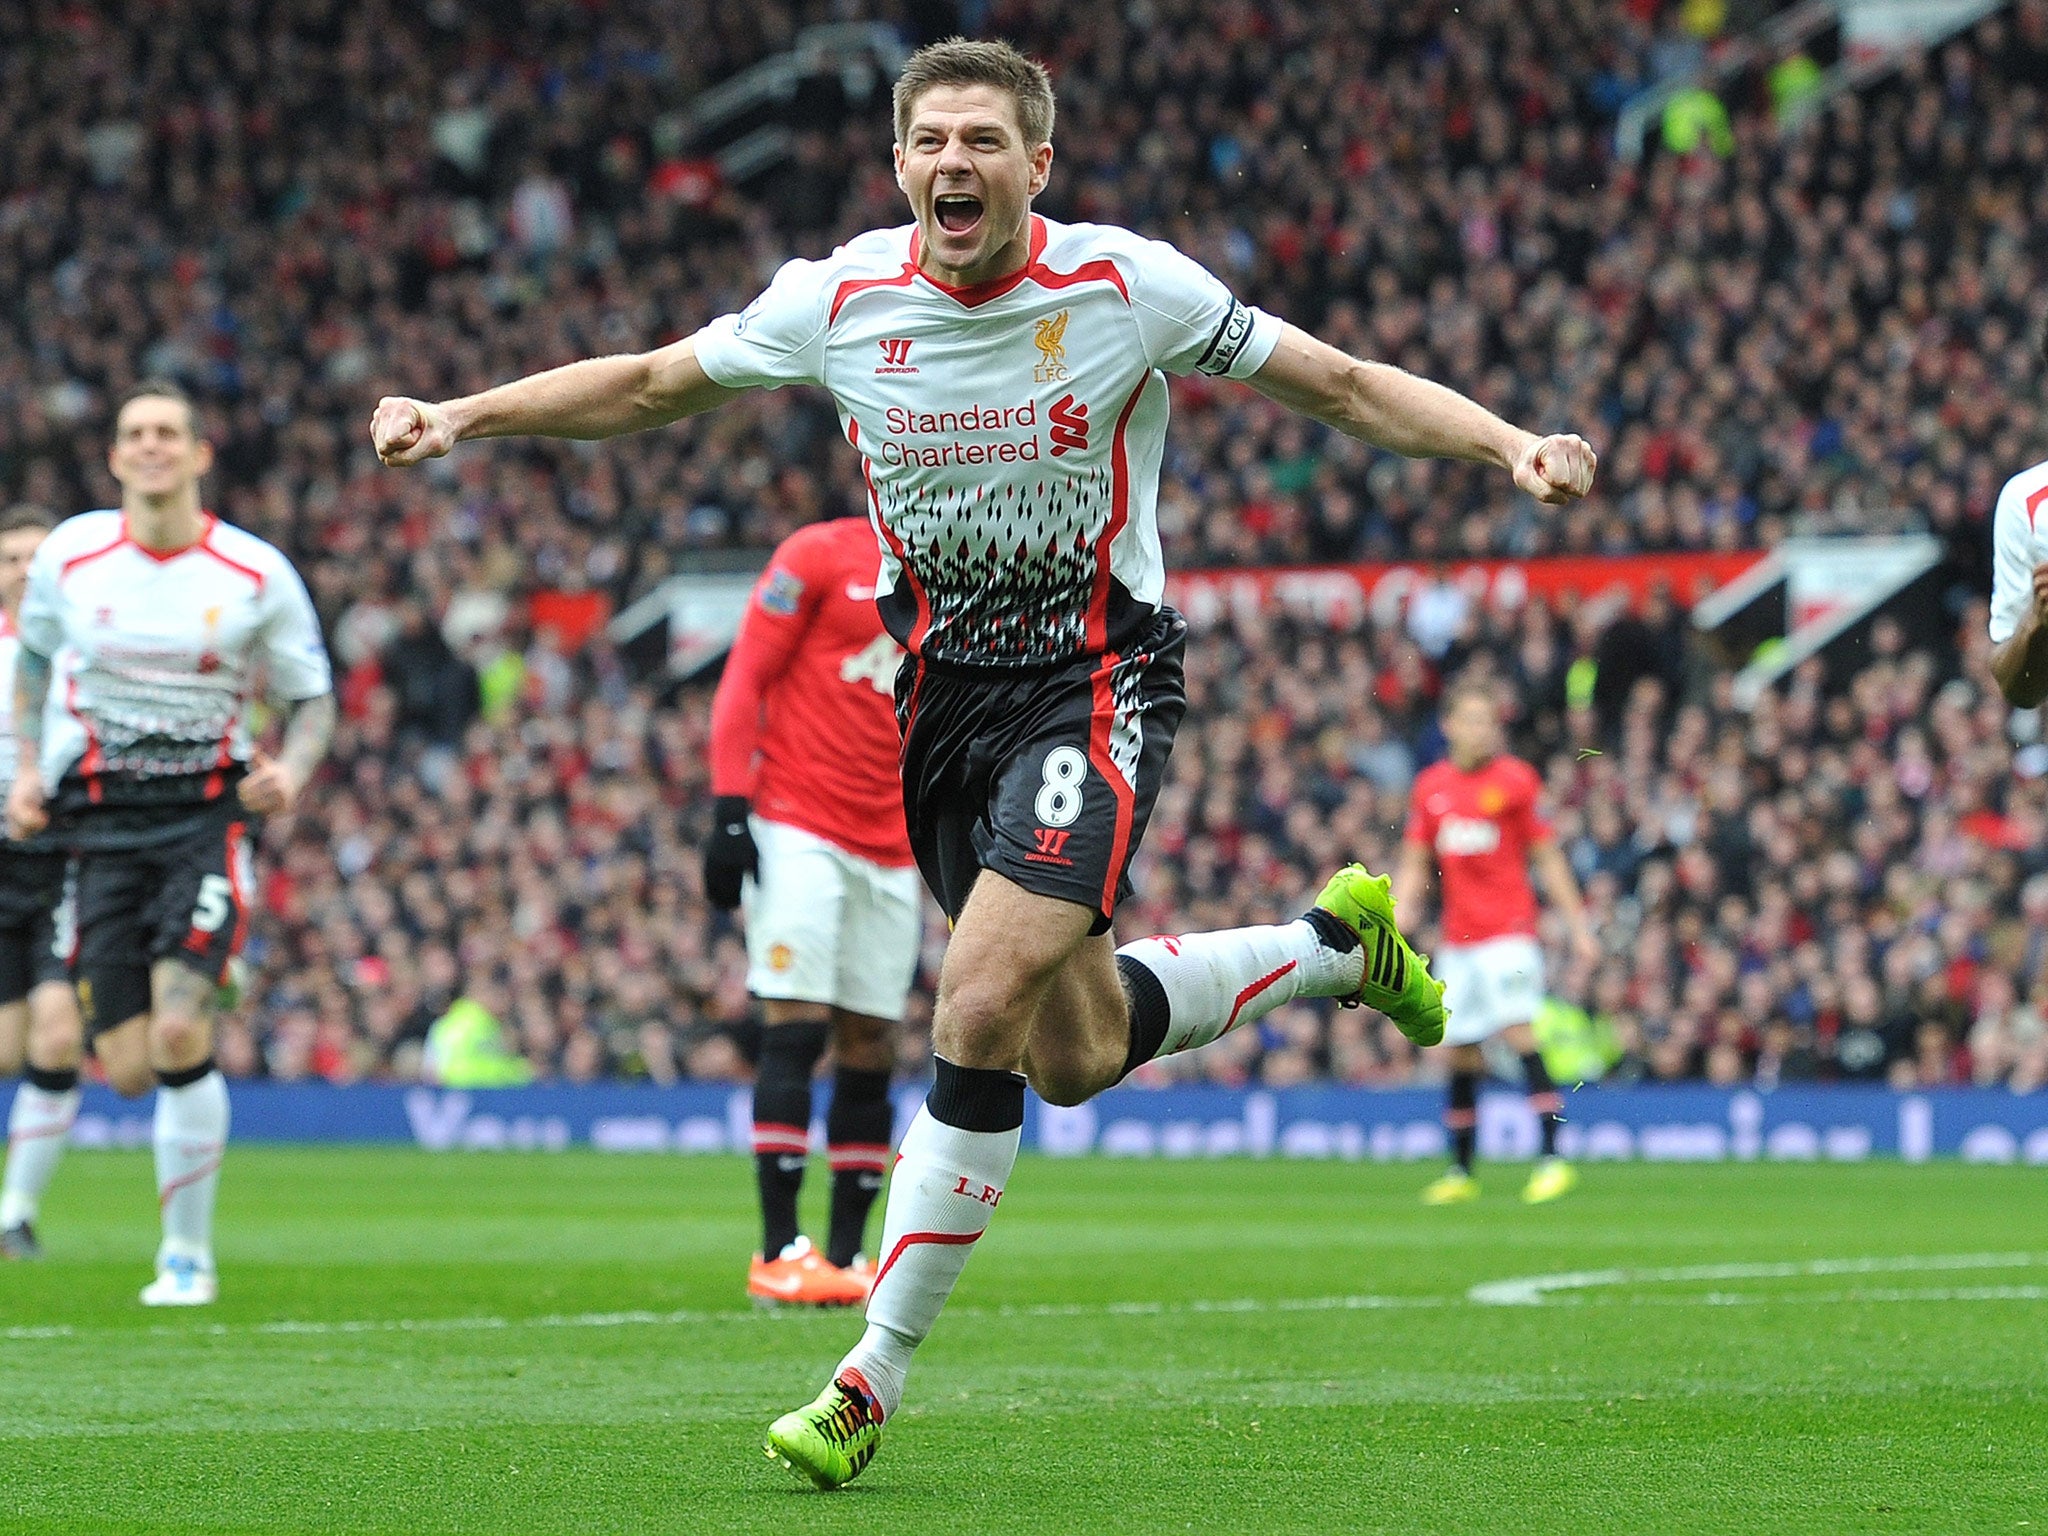 Steven Gerrard celebrates scoring his second penalty in the 3-0 win over Manchester United